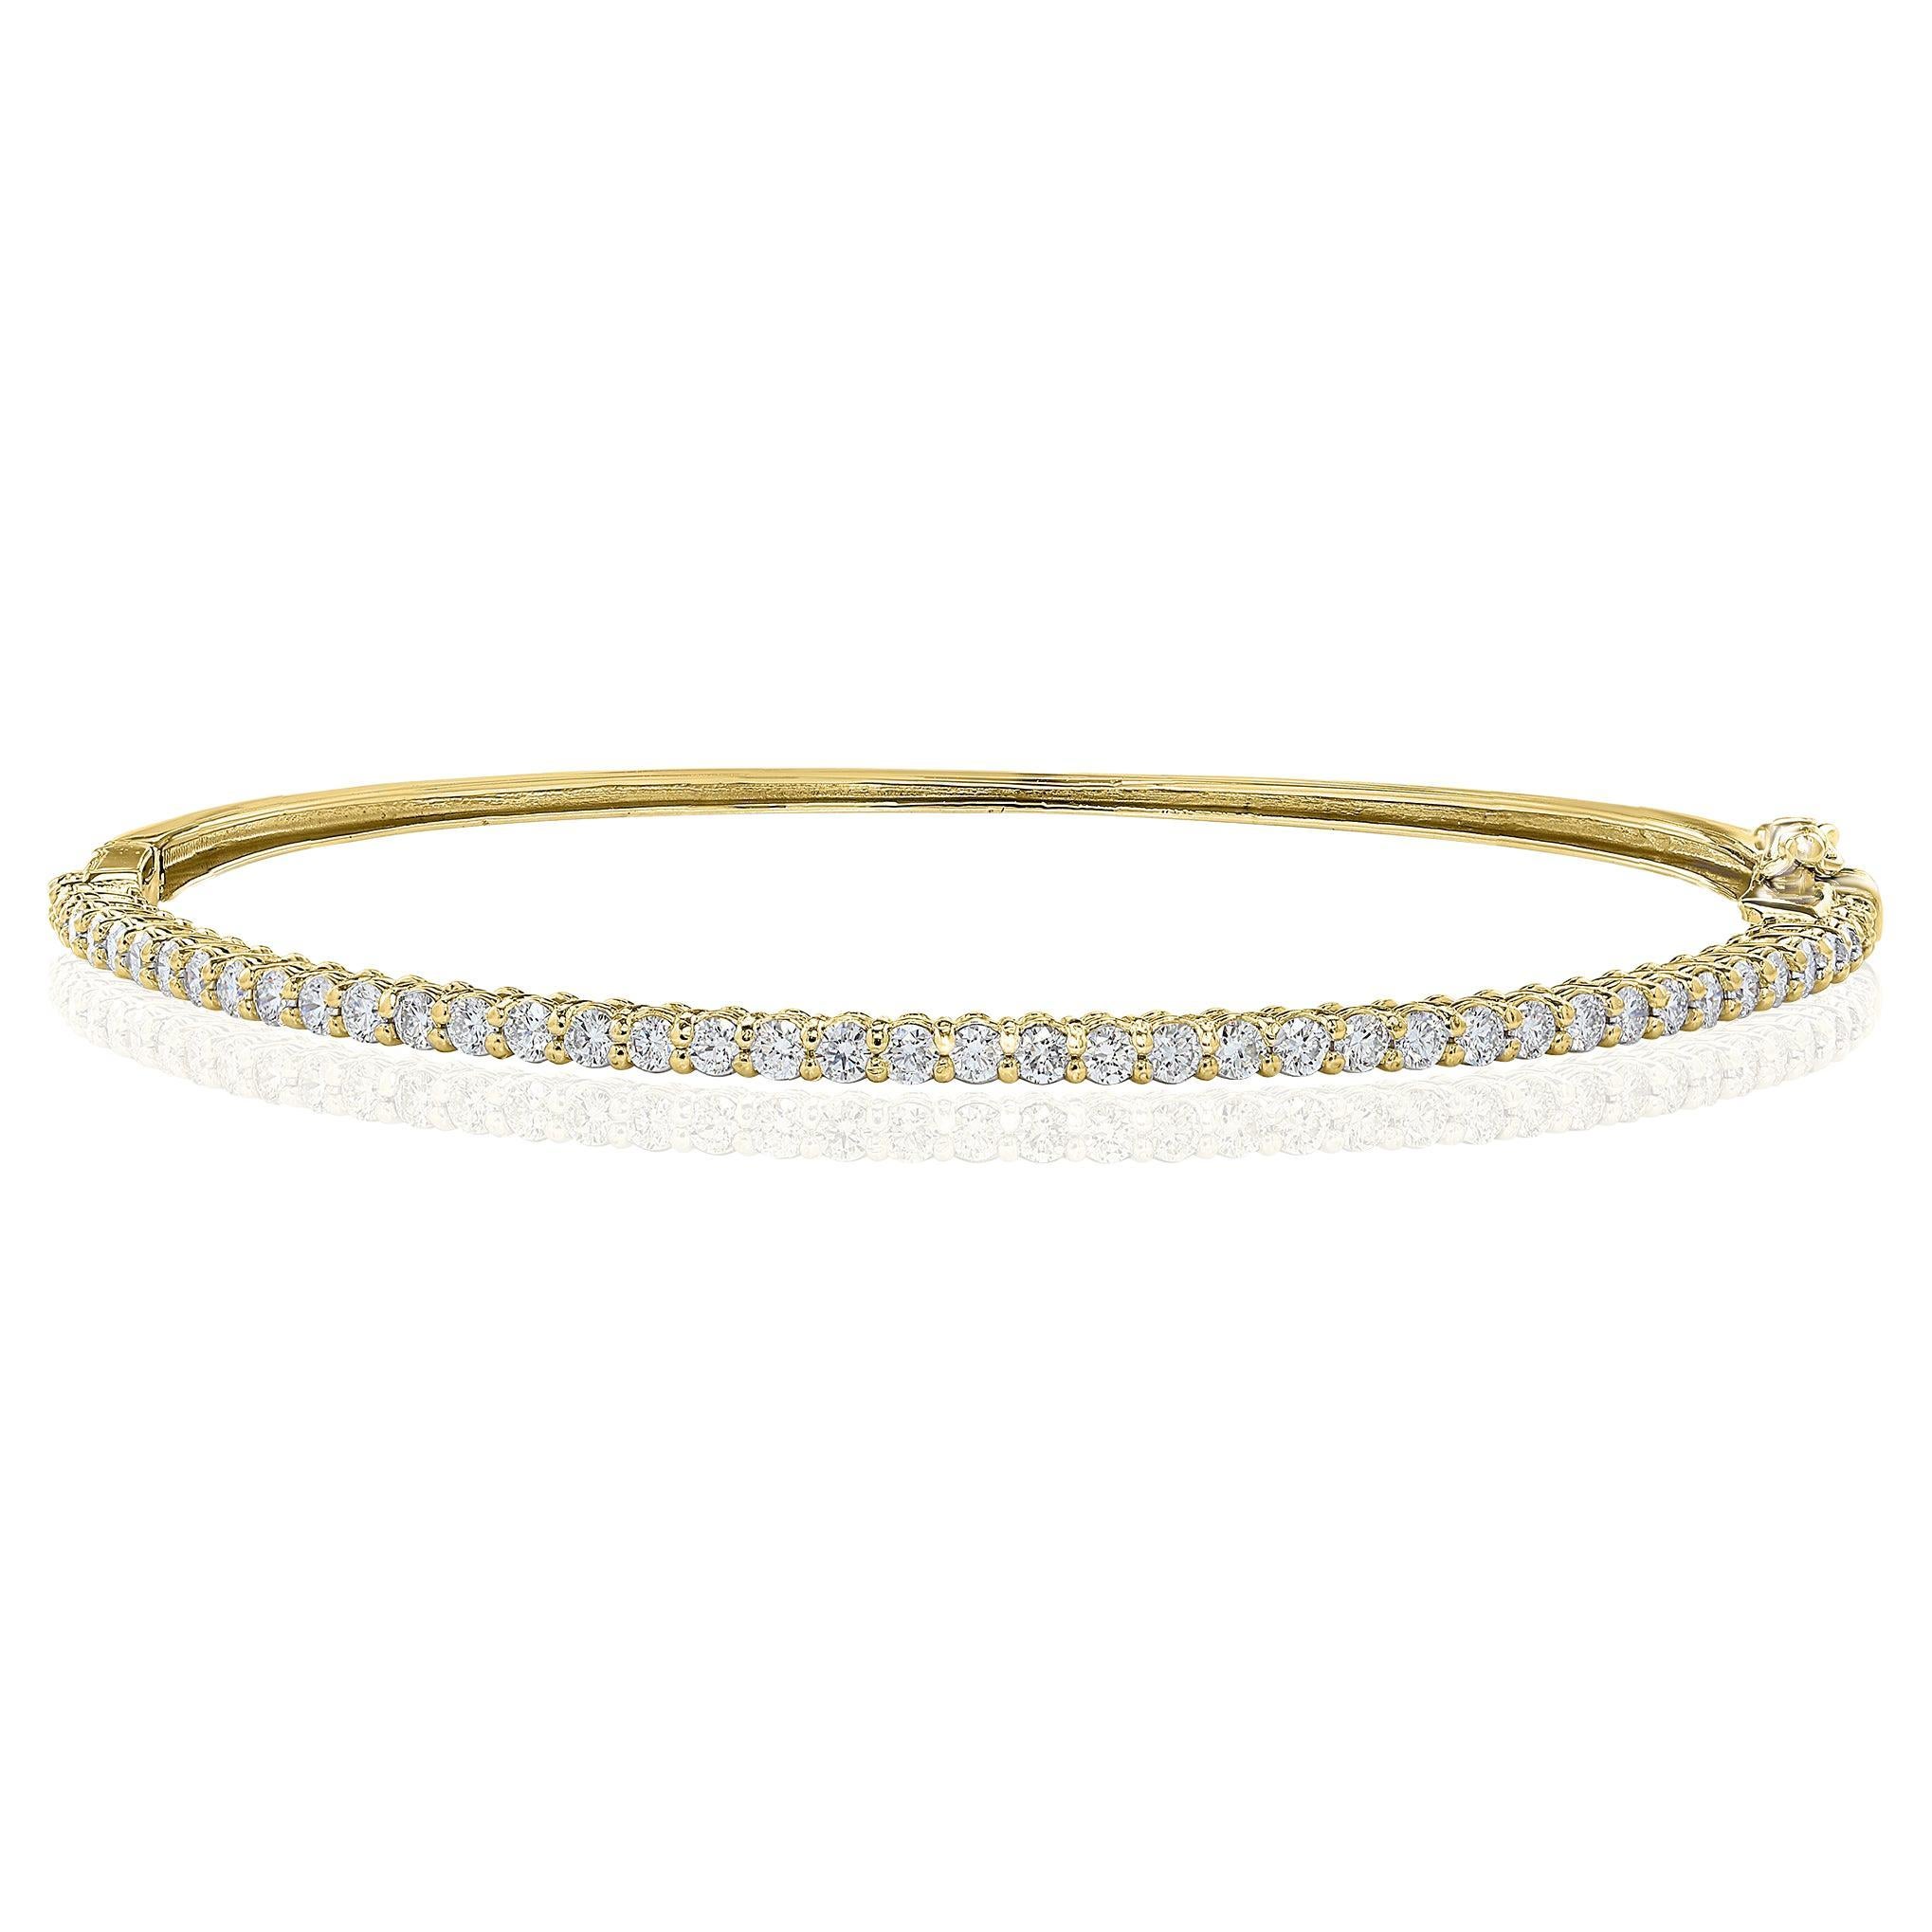 1.01 Carat Round Cut Diamond Yellow Gold Bangle Bracelet in 14K Yellow Gold For Sale